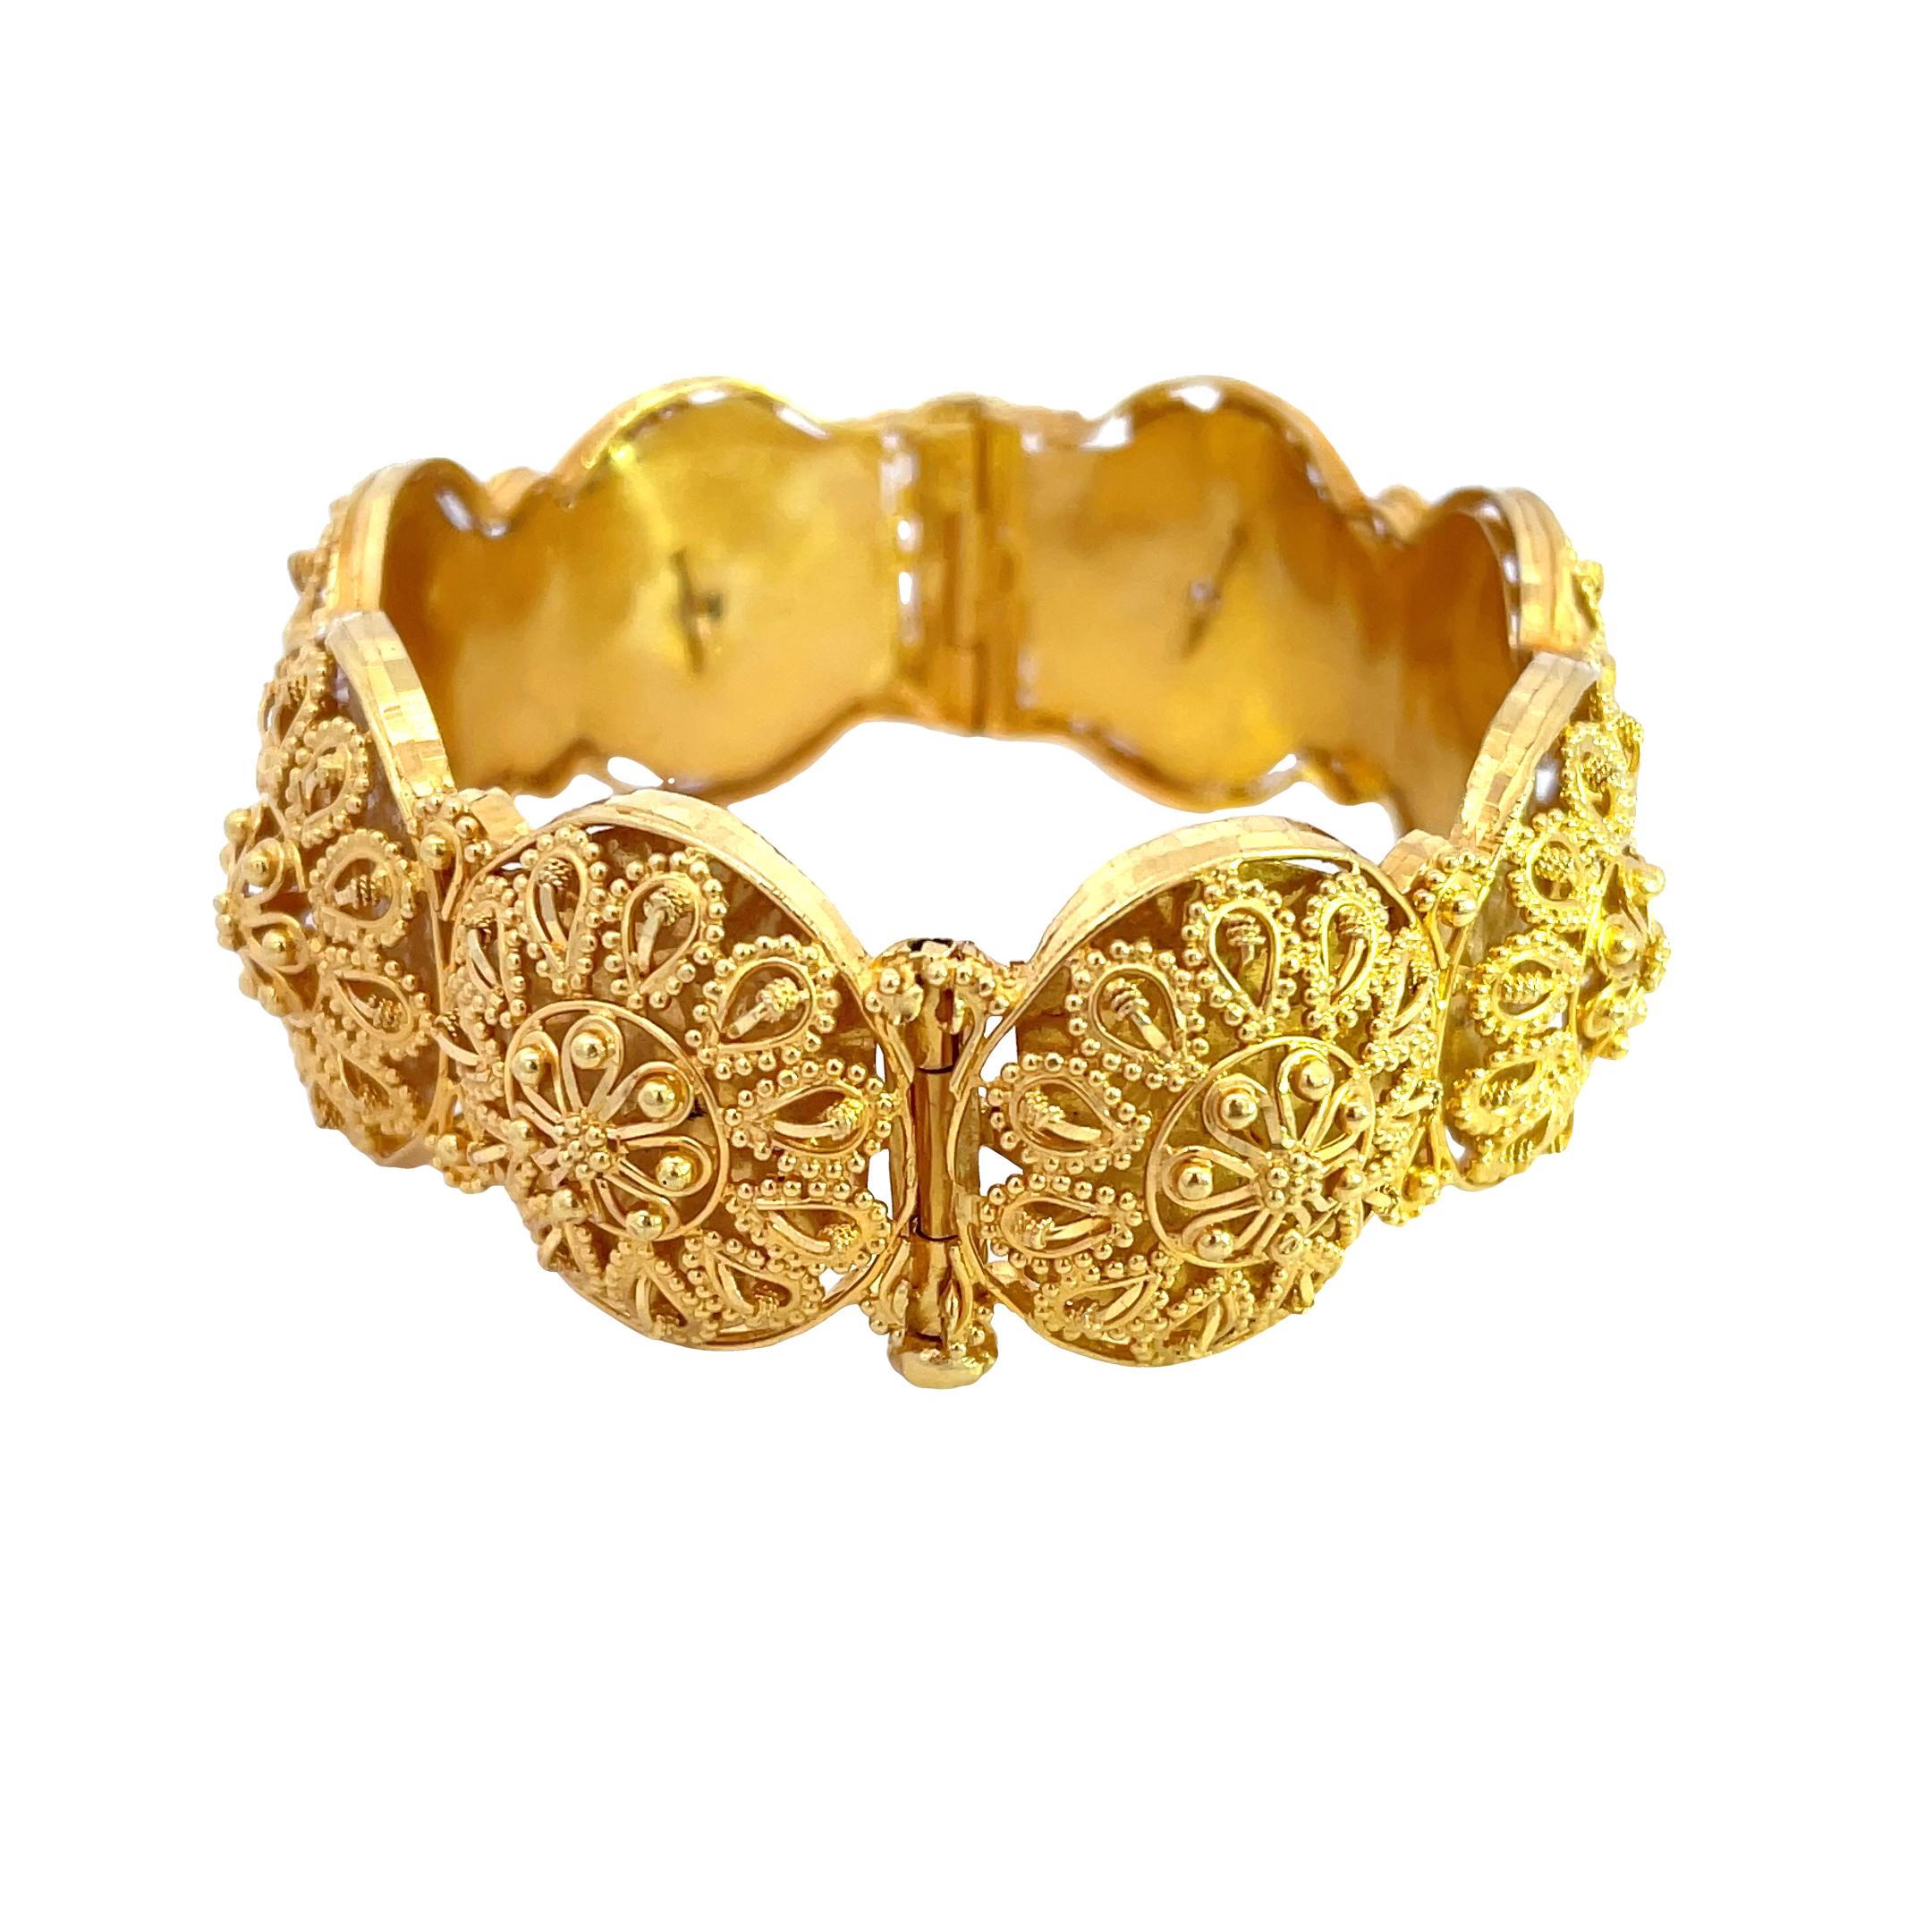 Introducing our exquisite 22K Yellow Gold 63.50 gram Cuff Bangle, a dazzling addition to your jewelry collection. An Impressive piece of jewelry will definitely make a statement. Made from lustrous 22K yellow gold, the Bangle showcase a radiant and